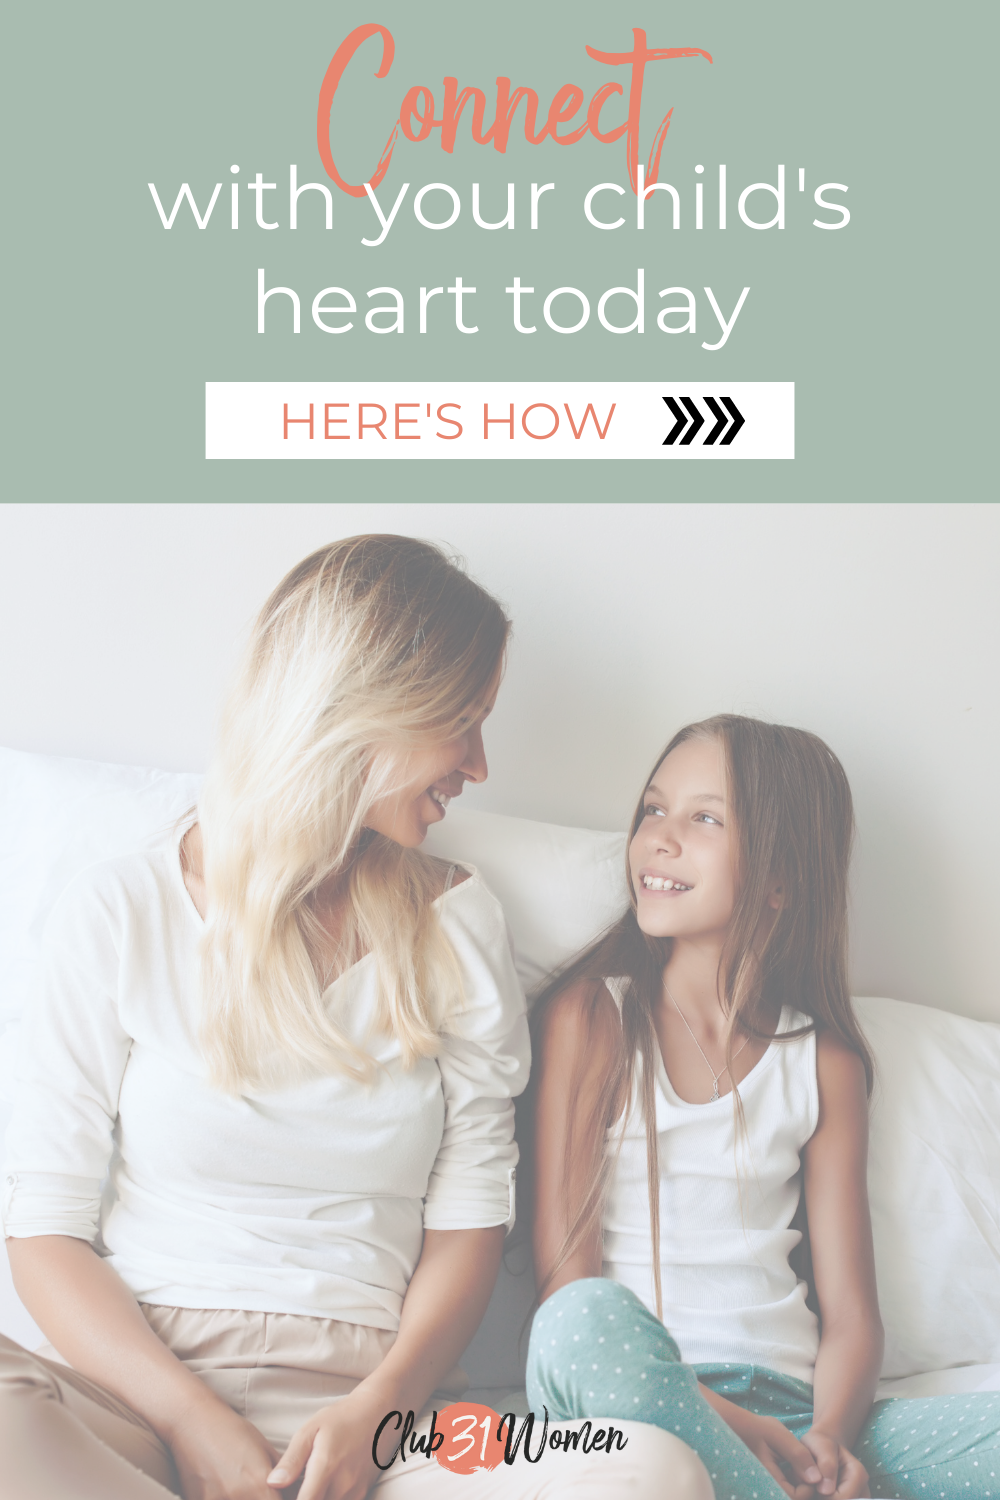 Sometimes our best laid plans just aren't enough to reach the heart of a child who needs more from us. How can we be present for them? via @Club31Women